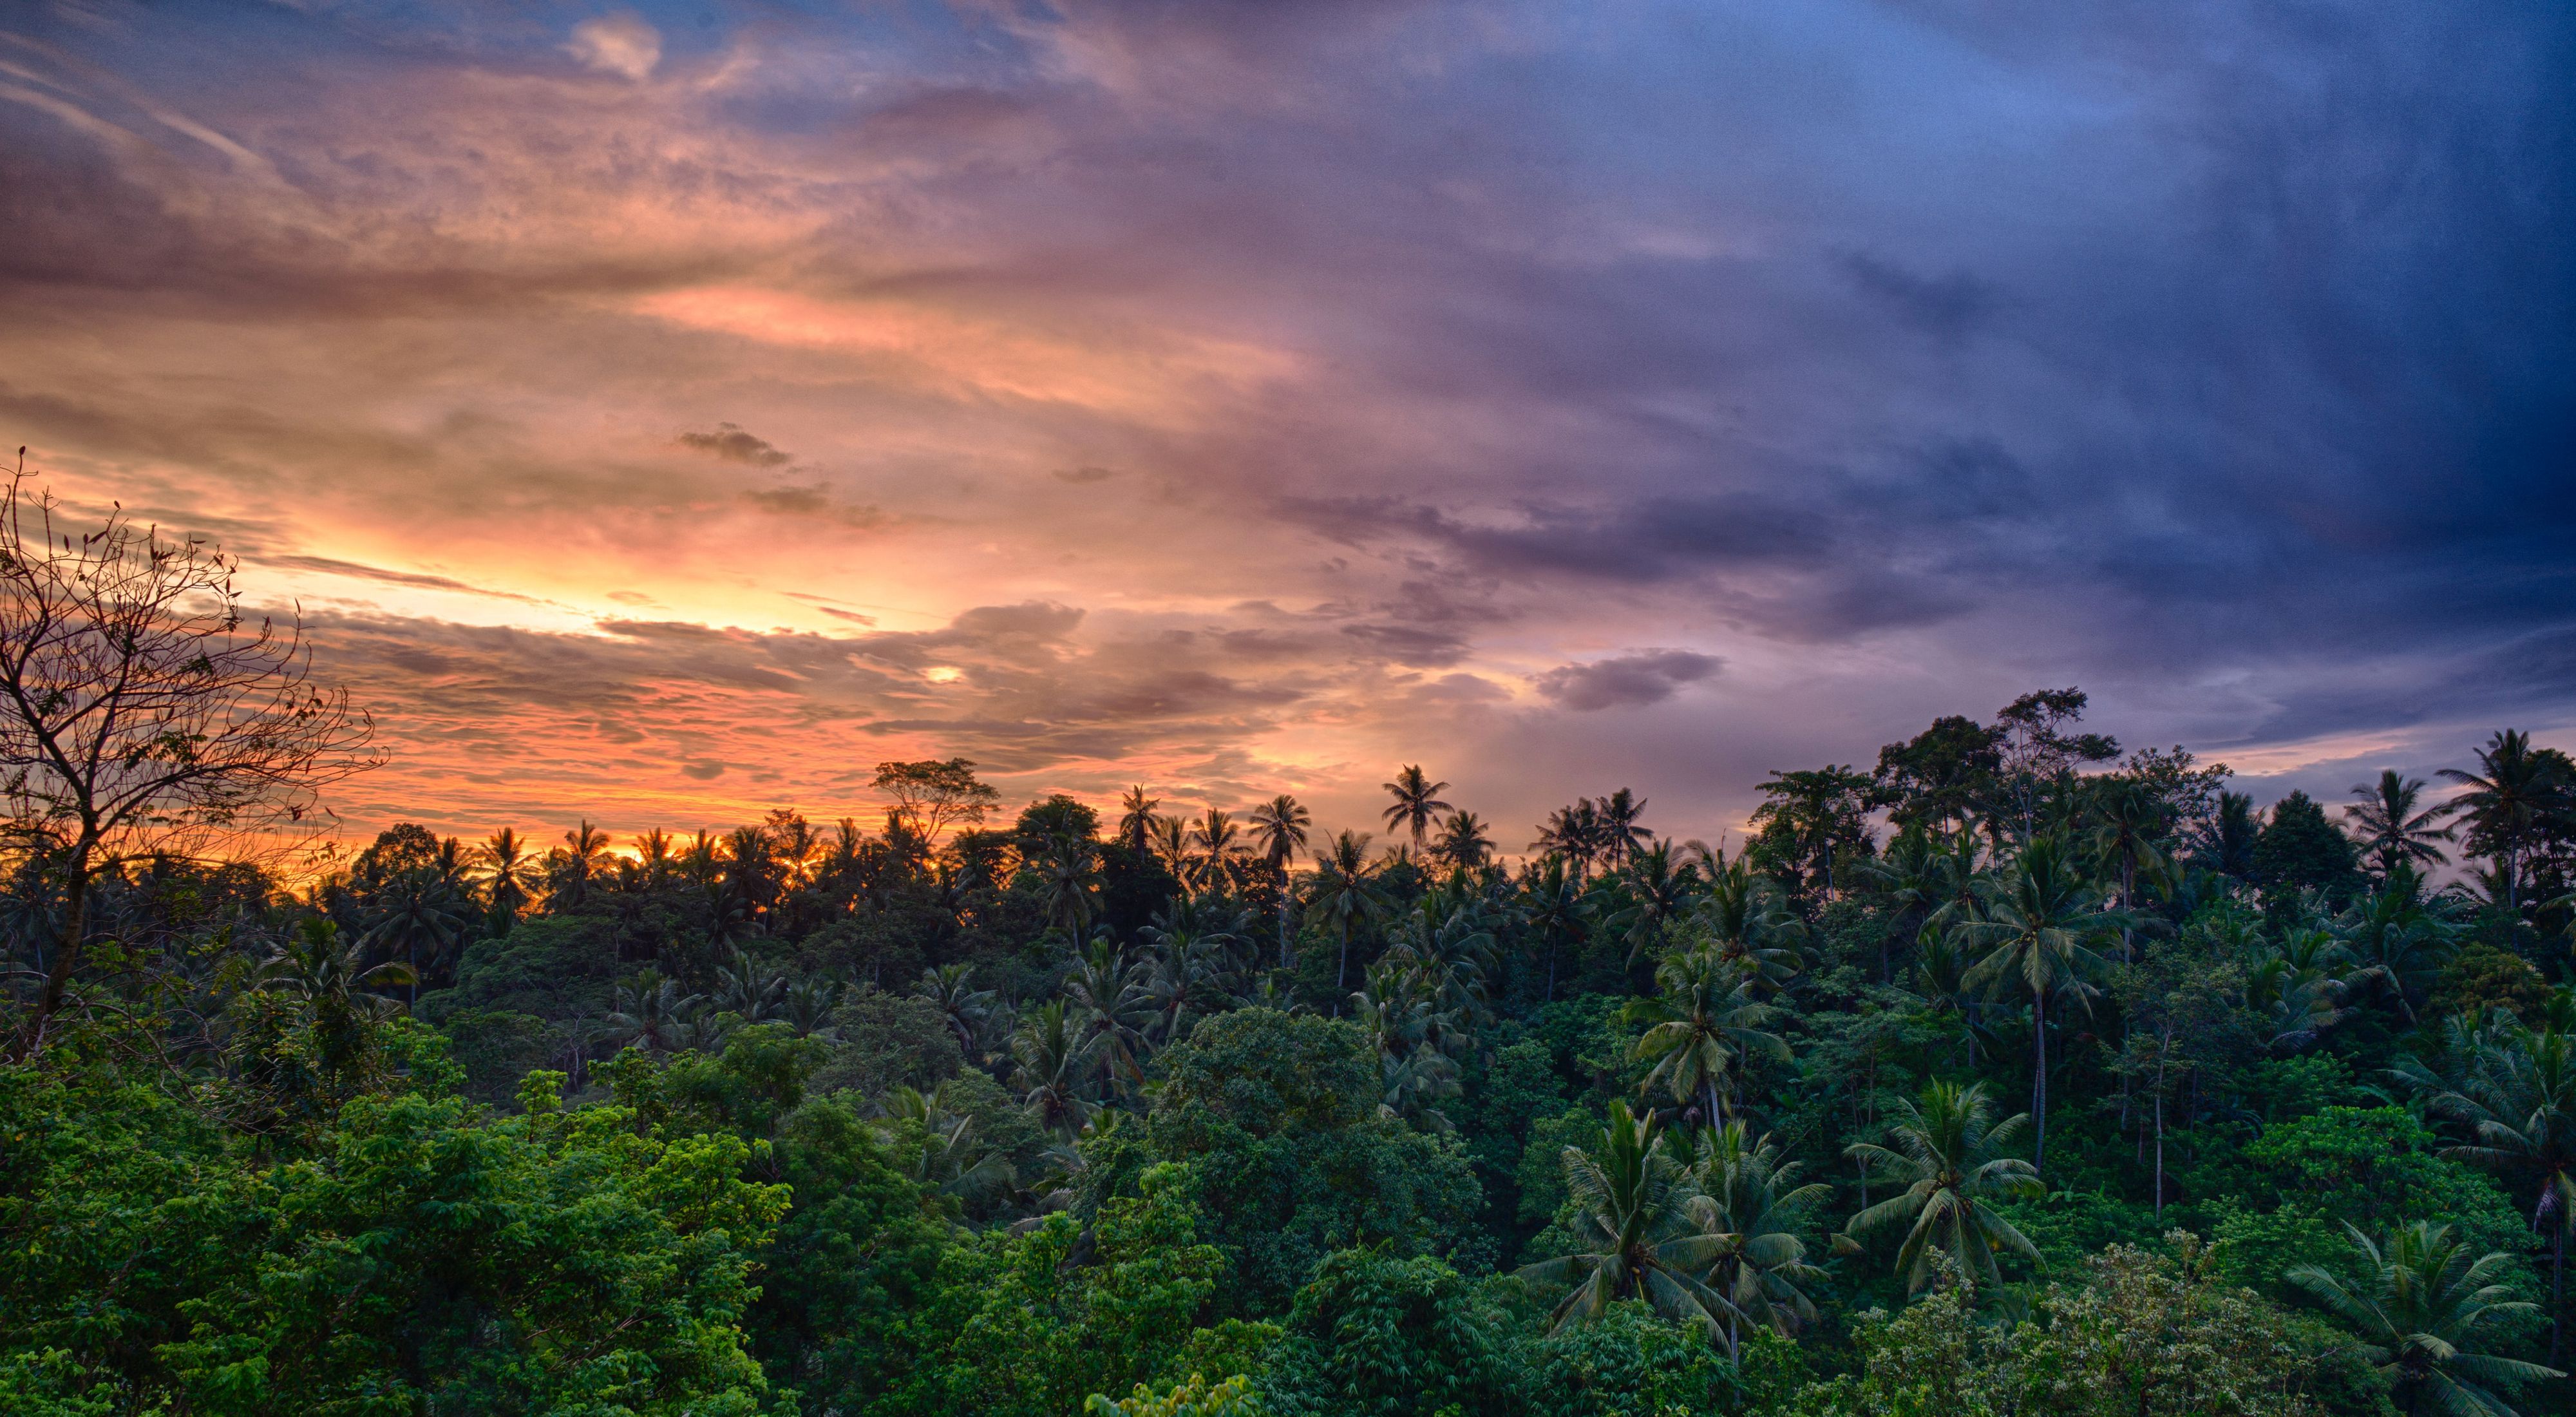 The sun sets over a tropical forest near Bali, Indonesia.